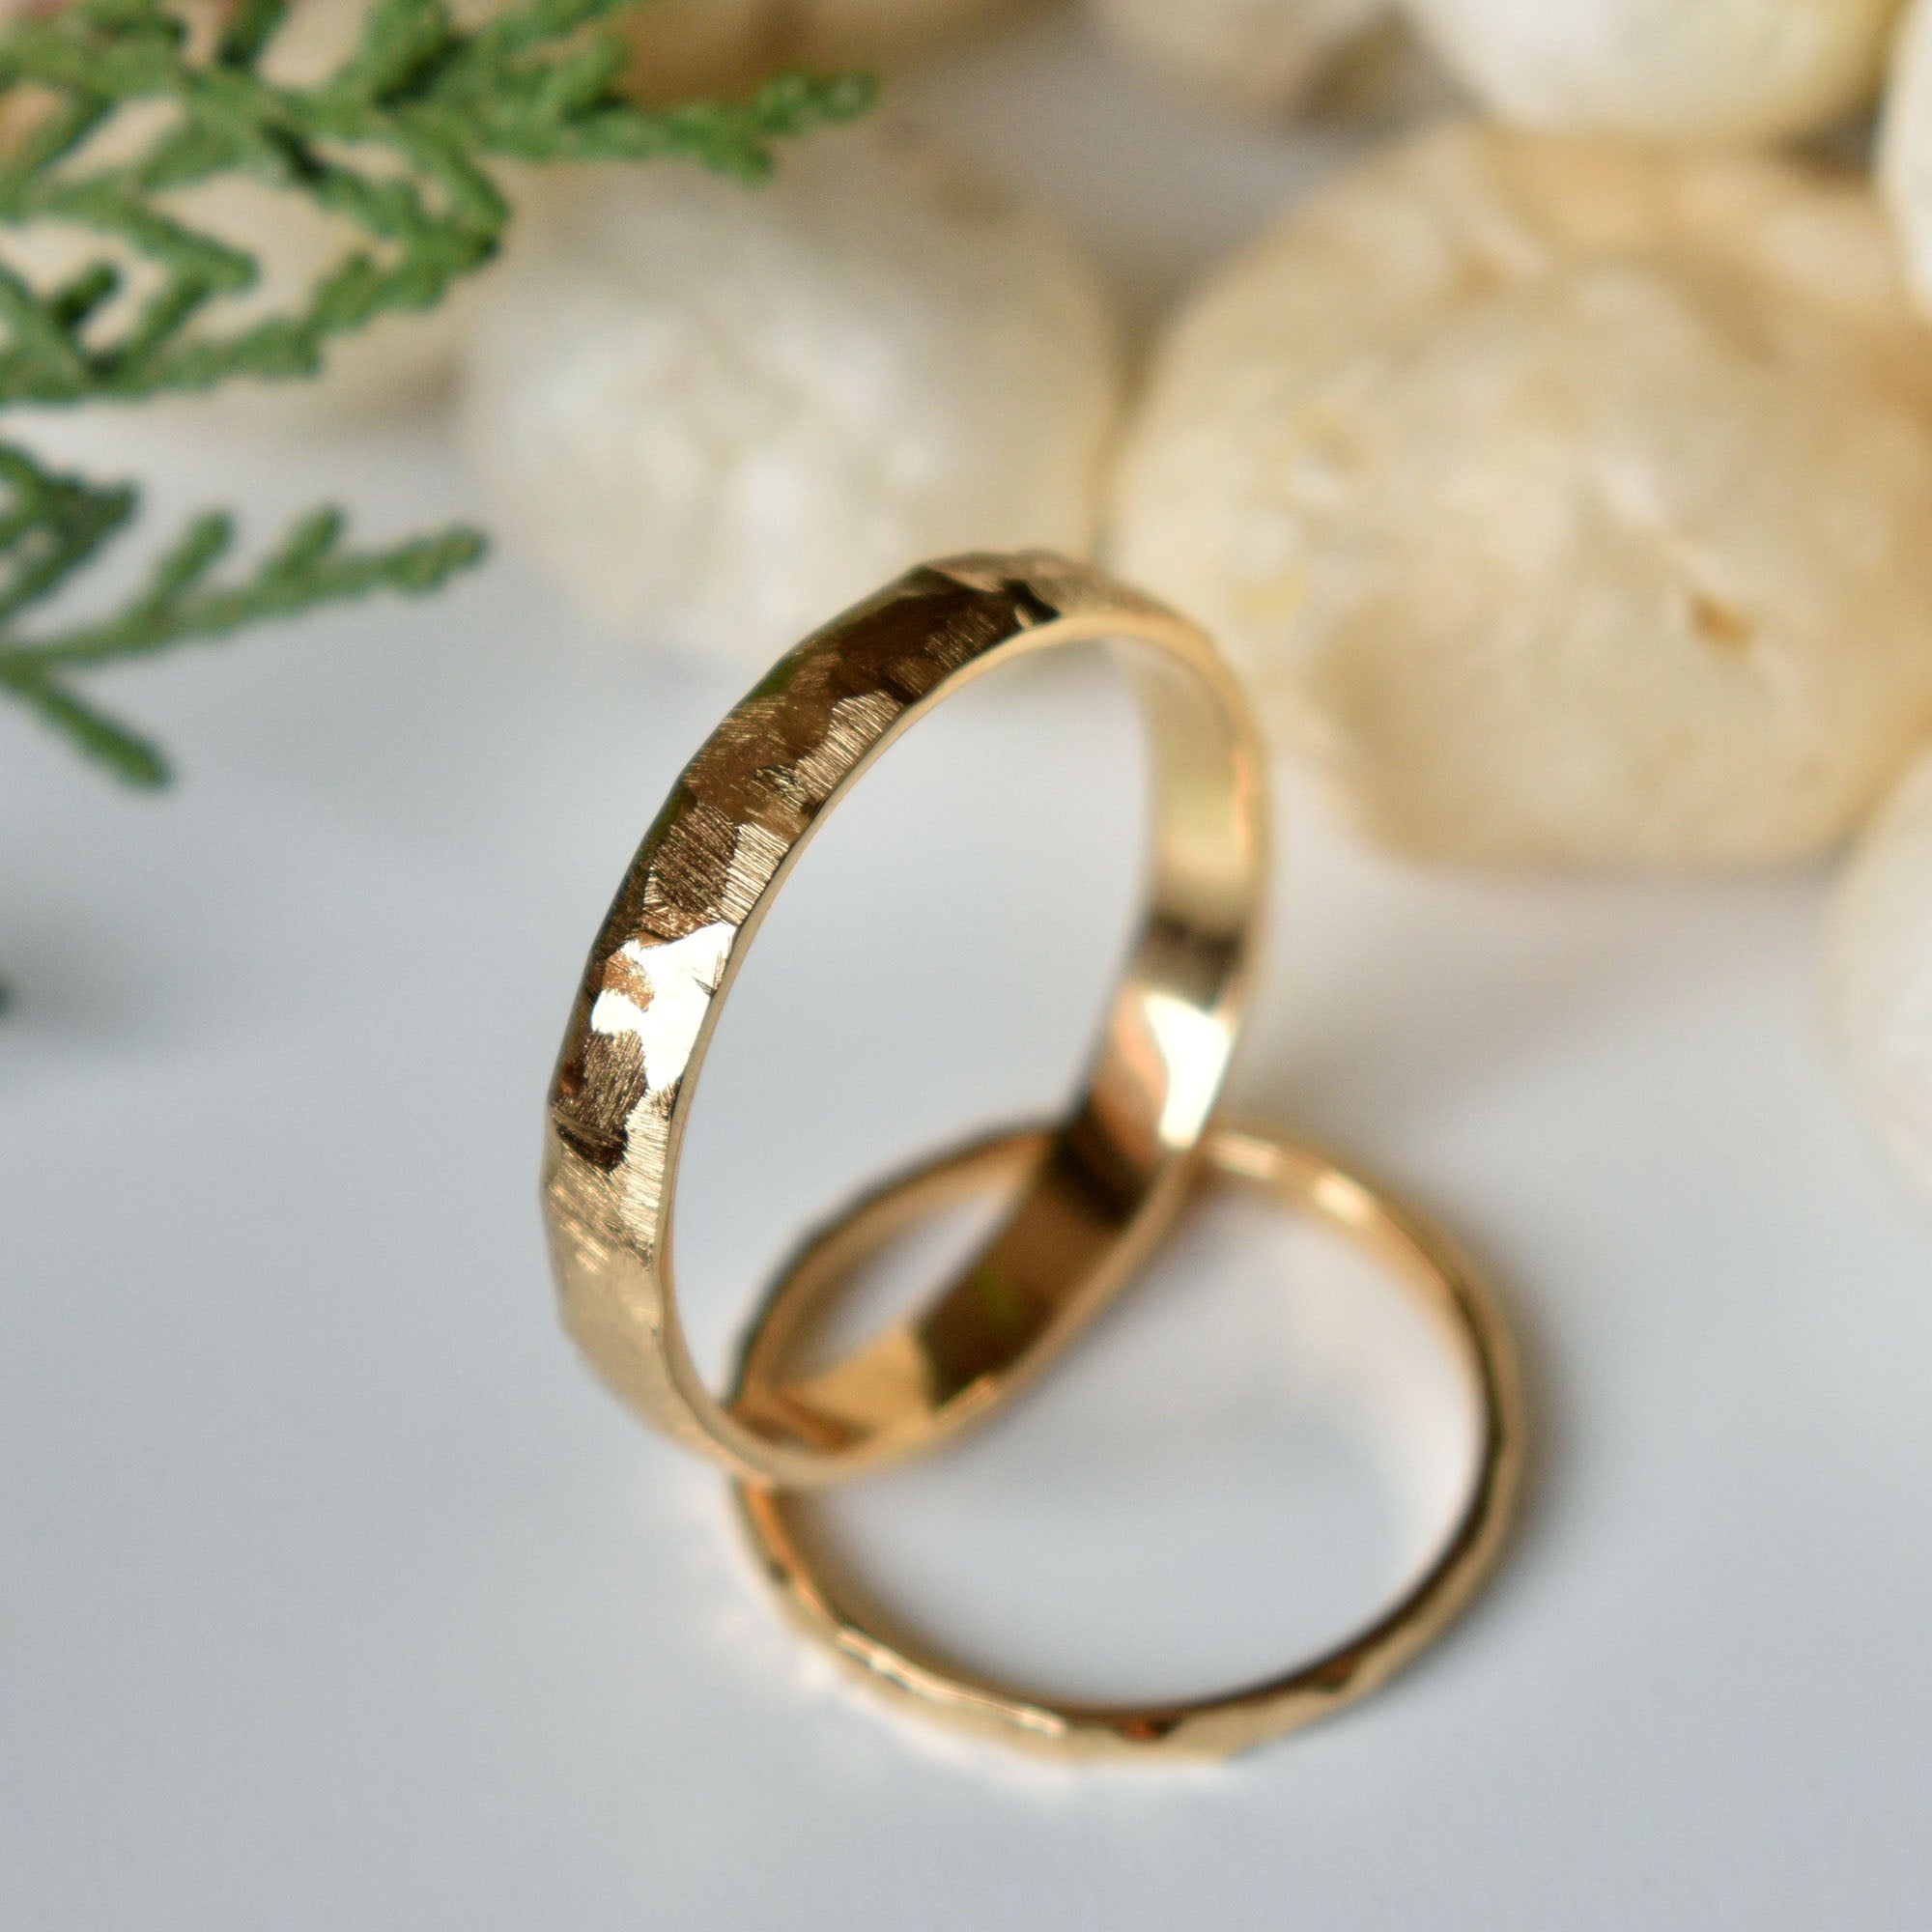 14k Solid Gold Matching Couples Rings in Brushed Finish - Abhika